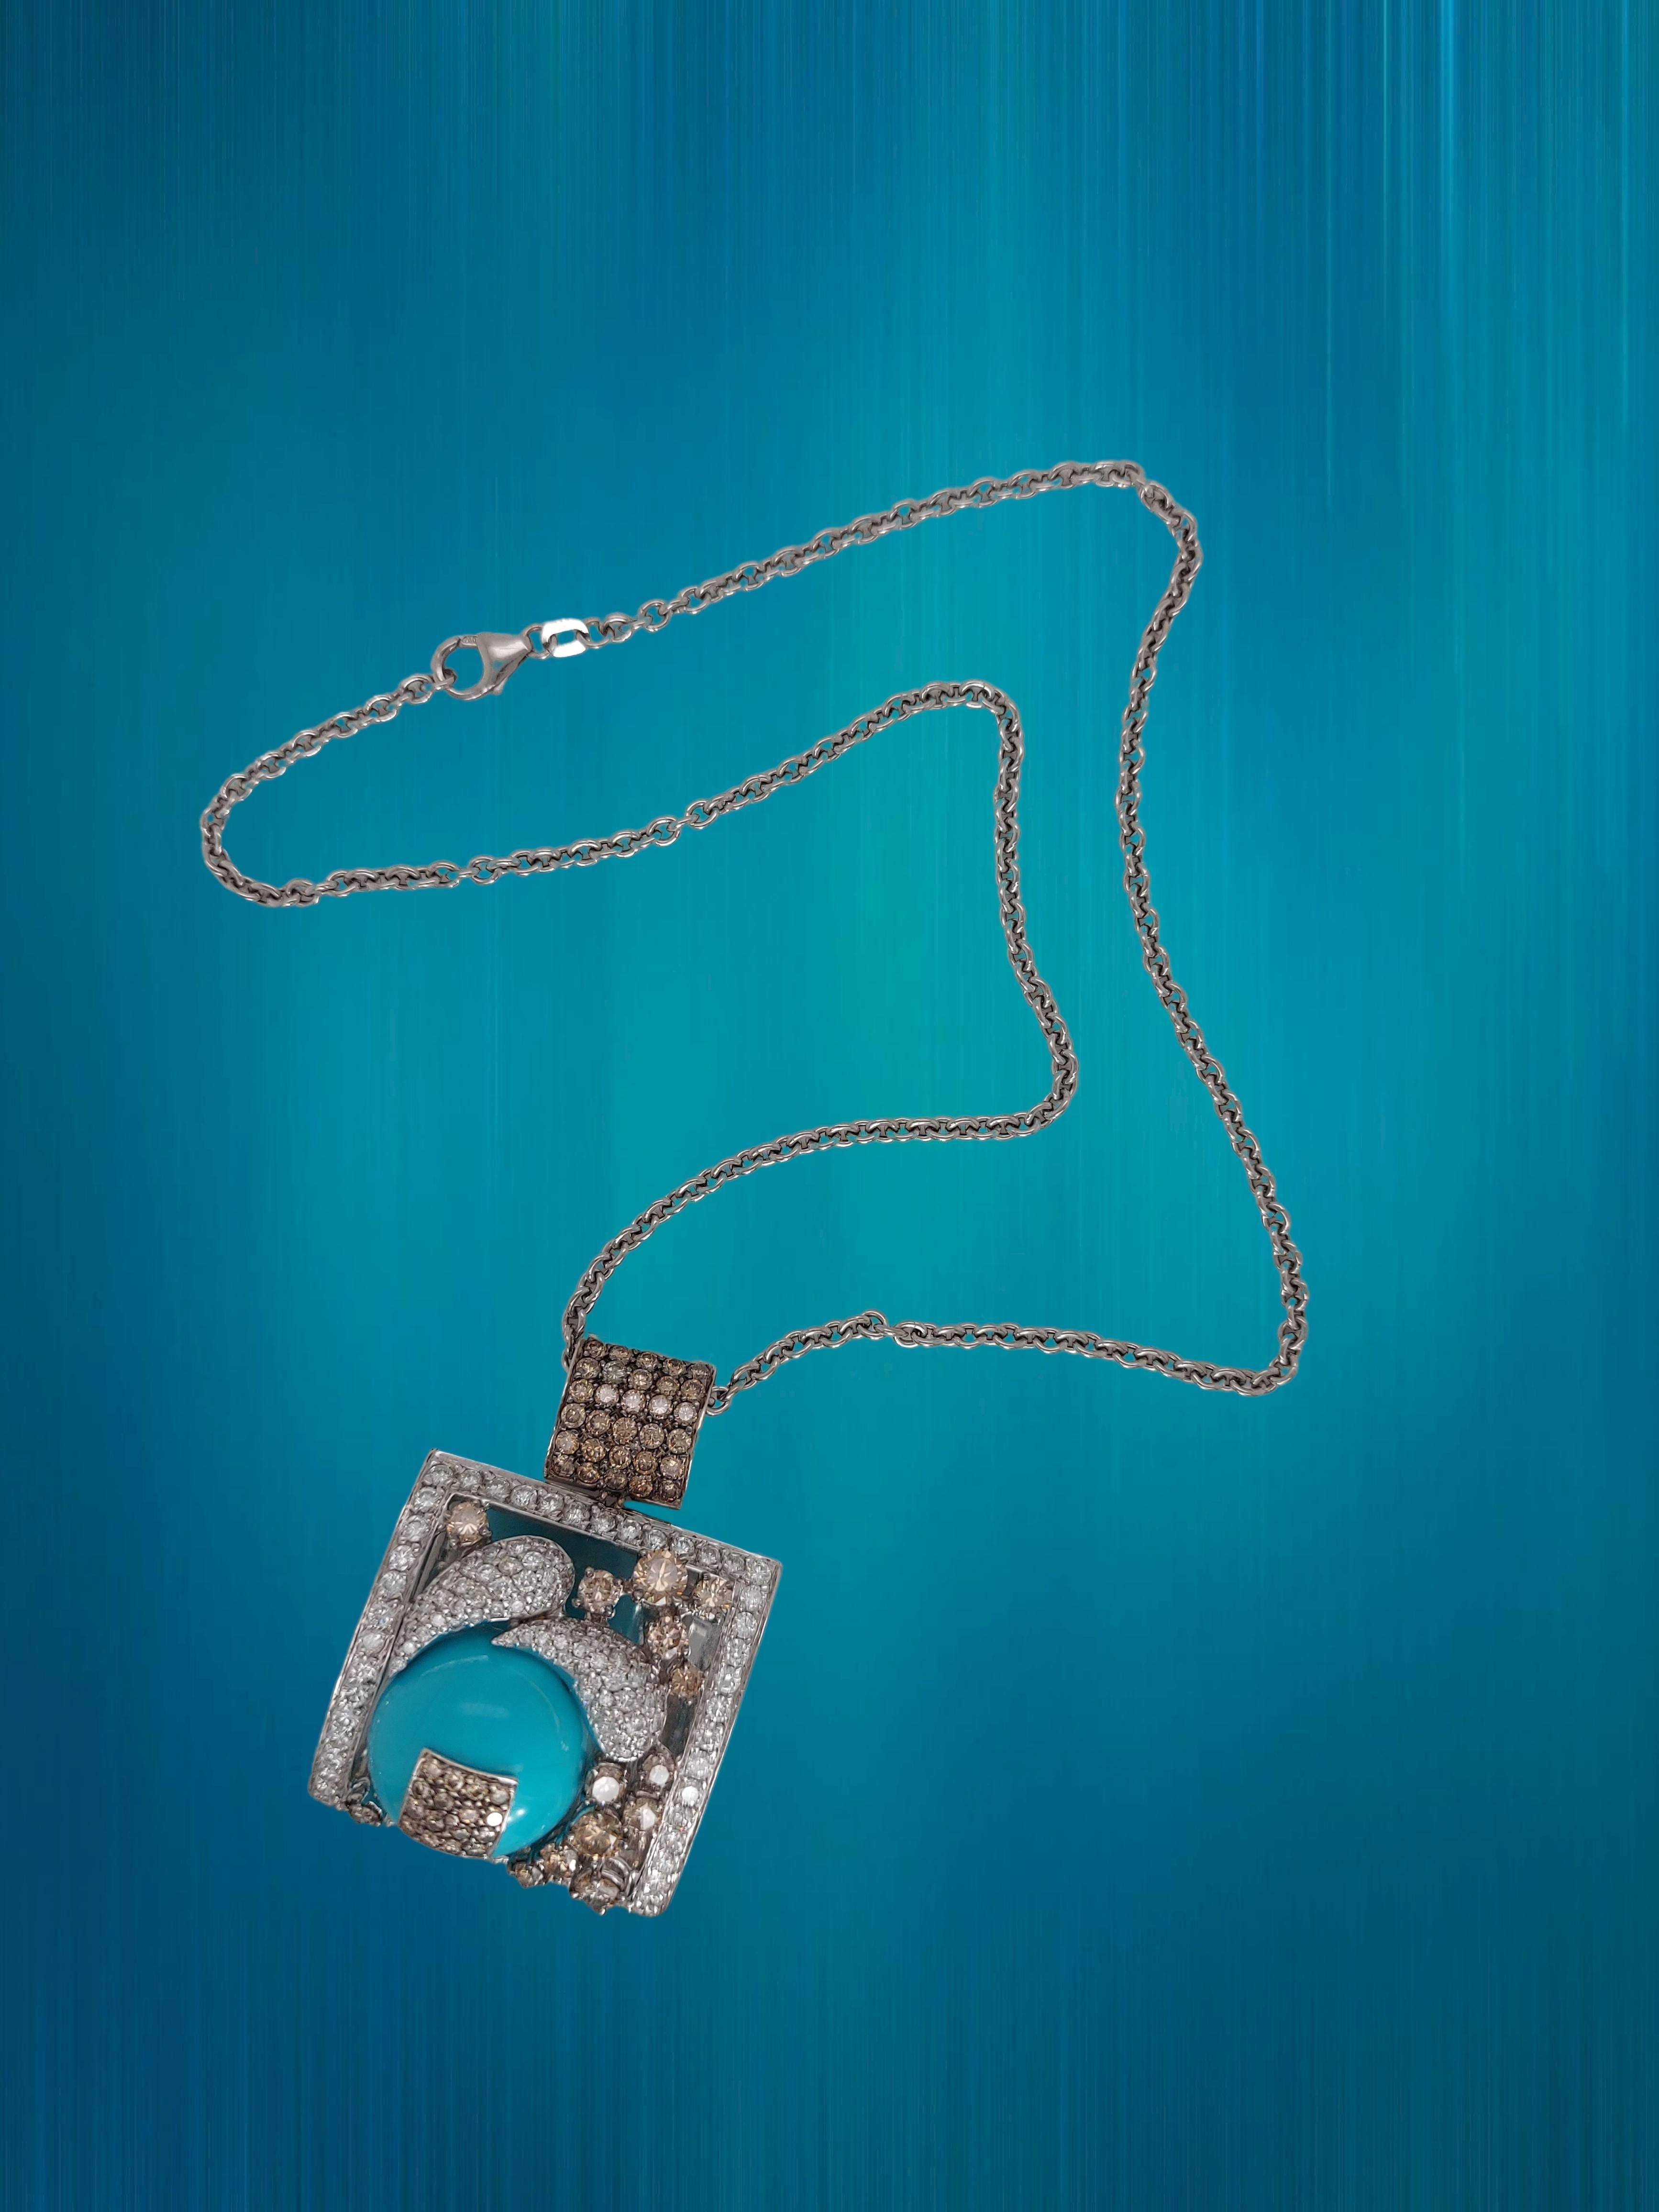 Stunning 18kt White Gold Pendant / Necklace with Turquoise and Diamonds 8